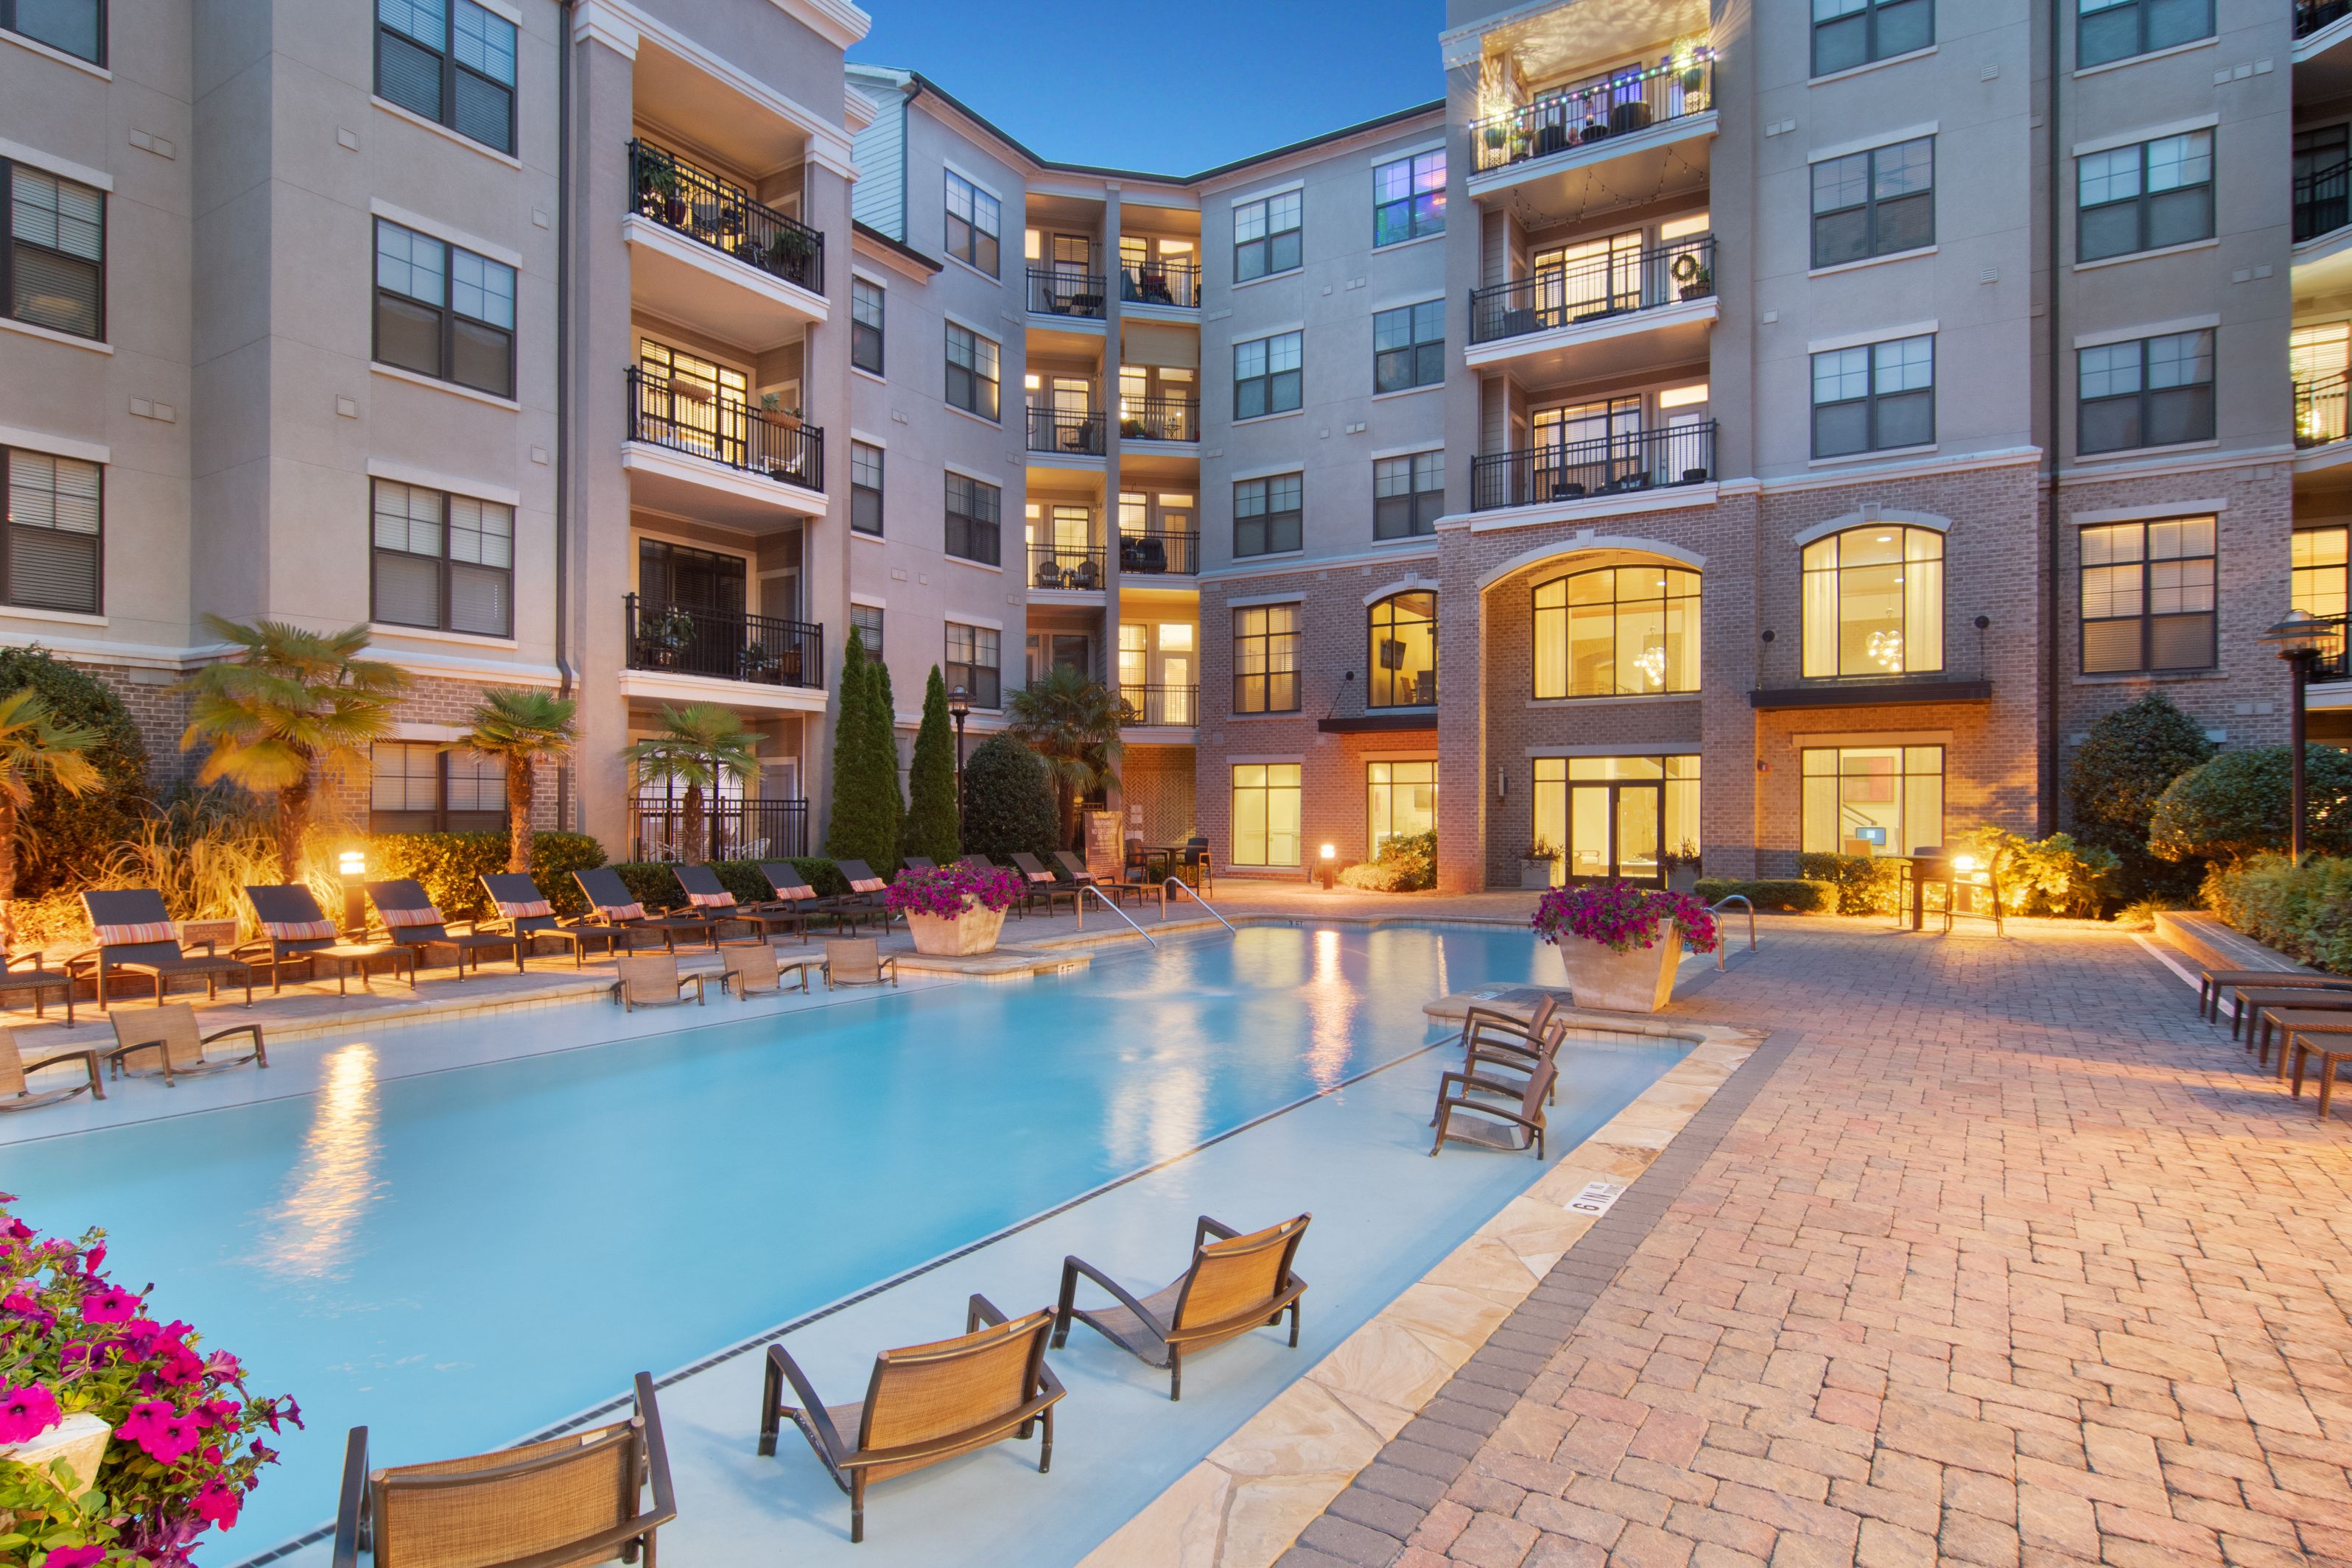 Resort-Style Swimming Pool at Brookleigh Flats Apartments in Brookhaven, GA